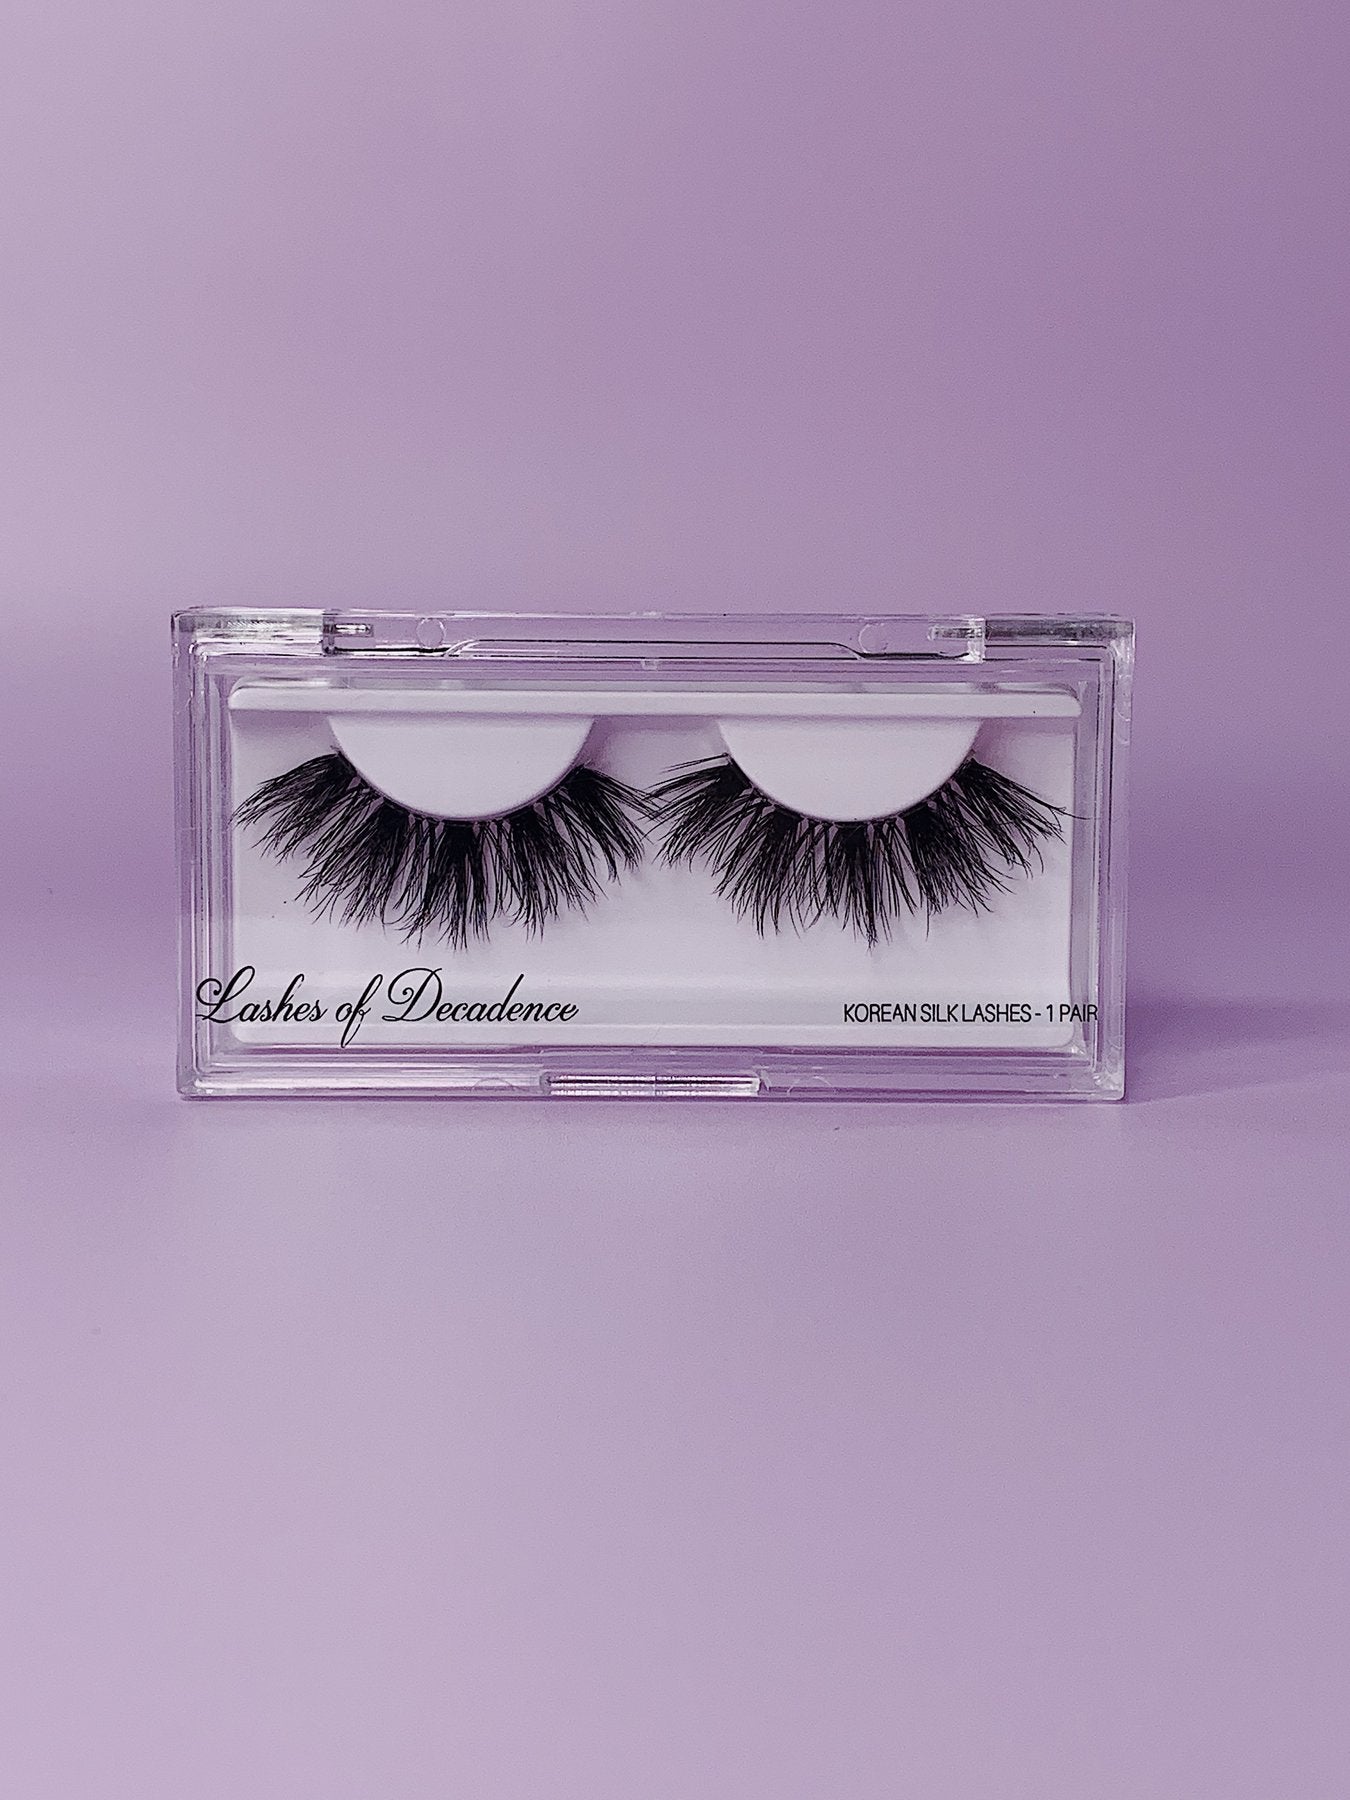 Glam Vibes: The Unveiling of Silk Lashes!